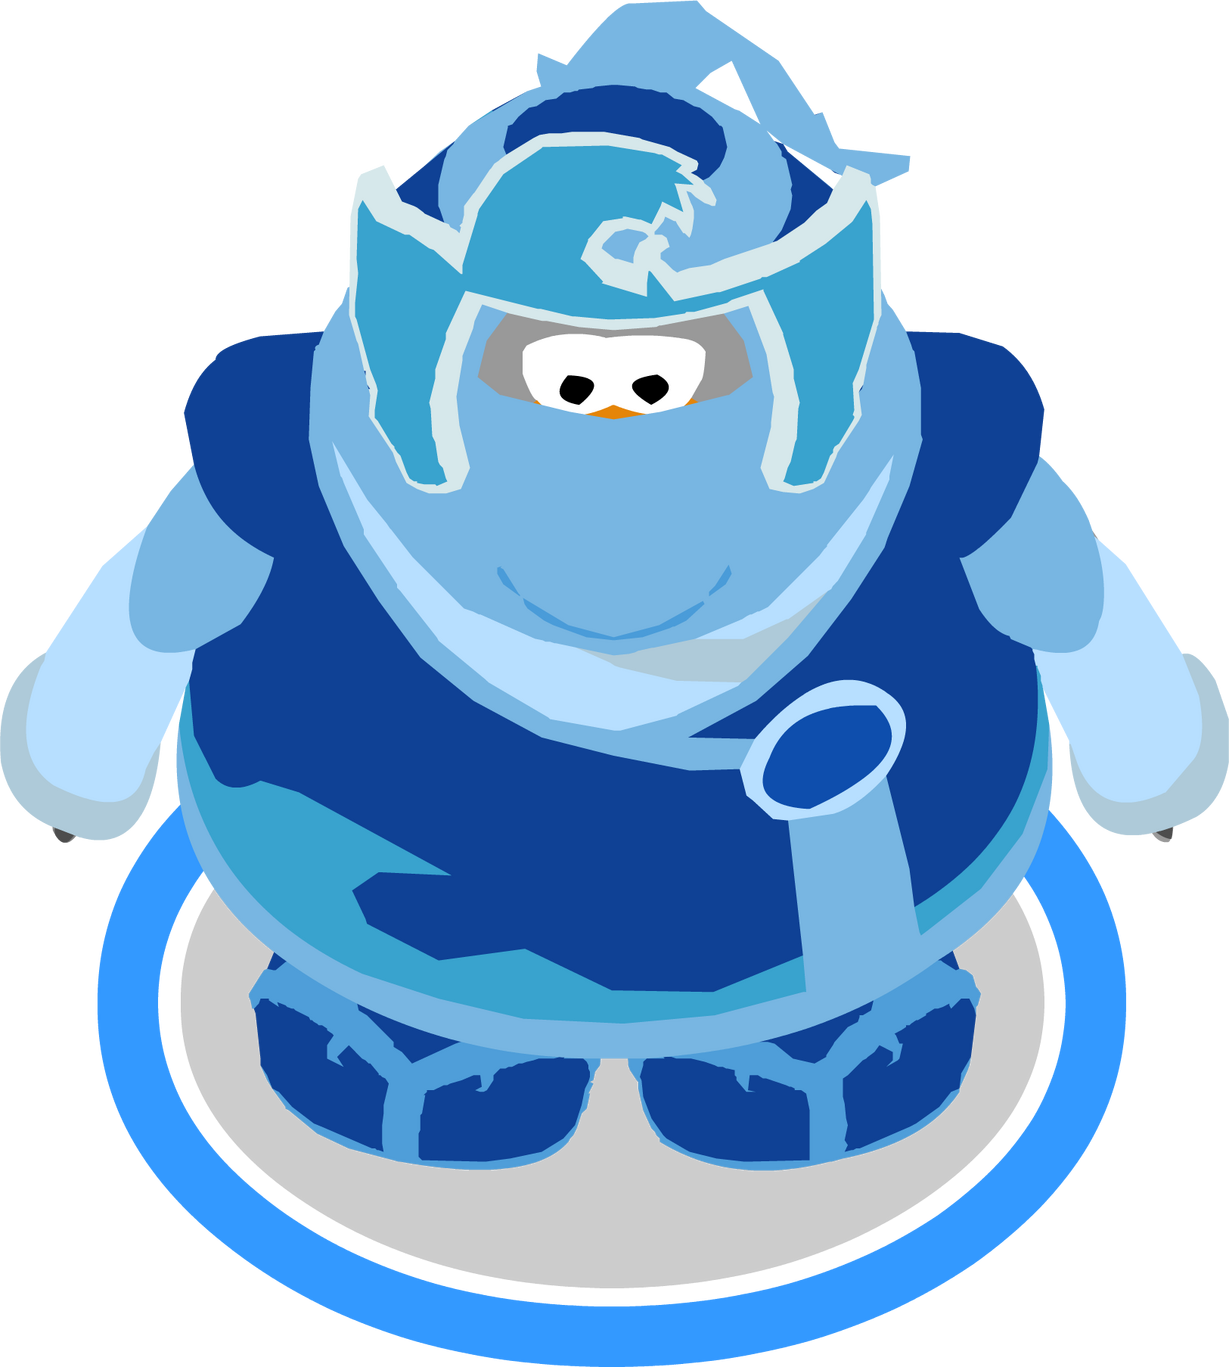 https://static.wikia.nocookie.net/clubpenguin/images/8/88/Water_suit_in-game.png/revision/latest/scale-to-width-down/1229?cb=20130604124313